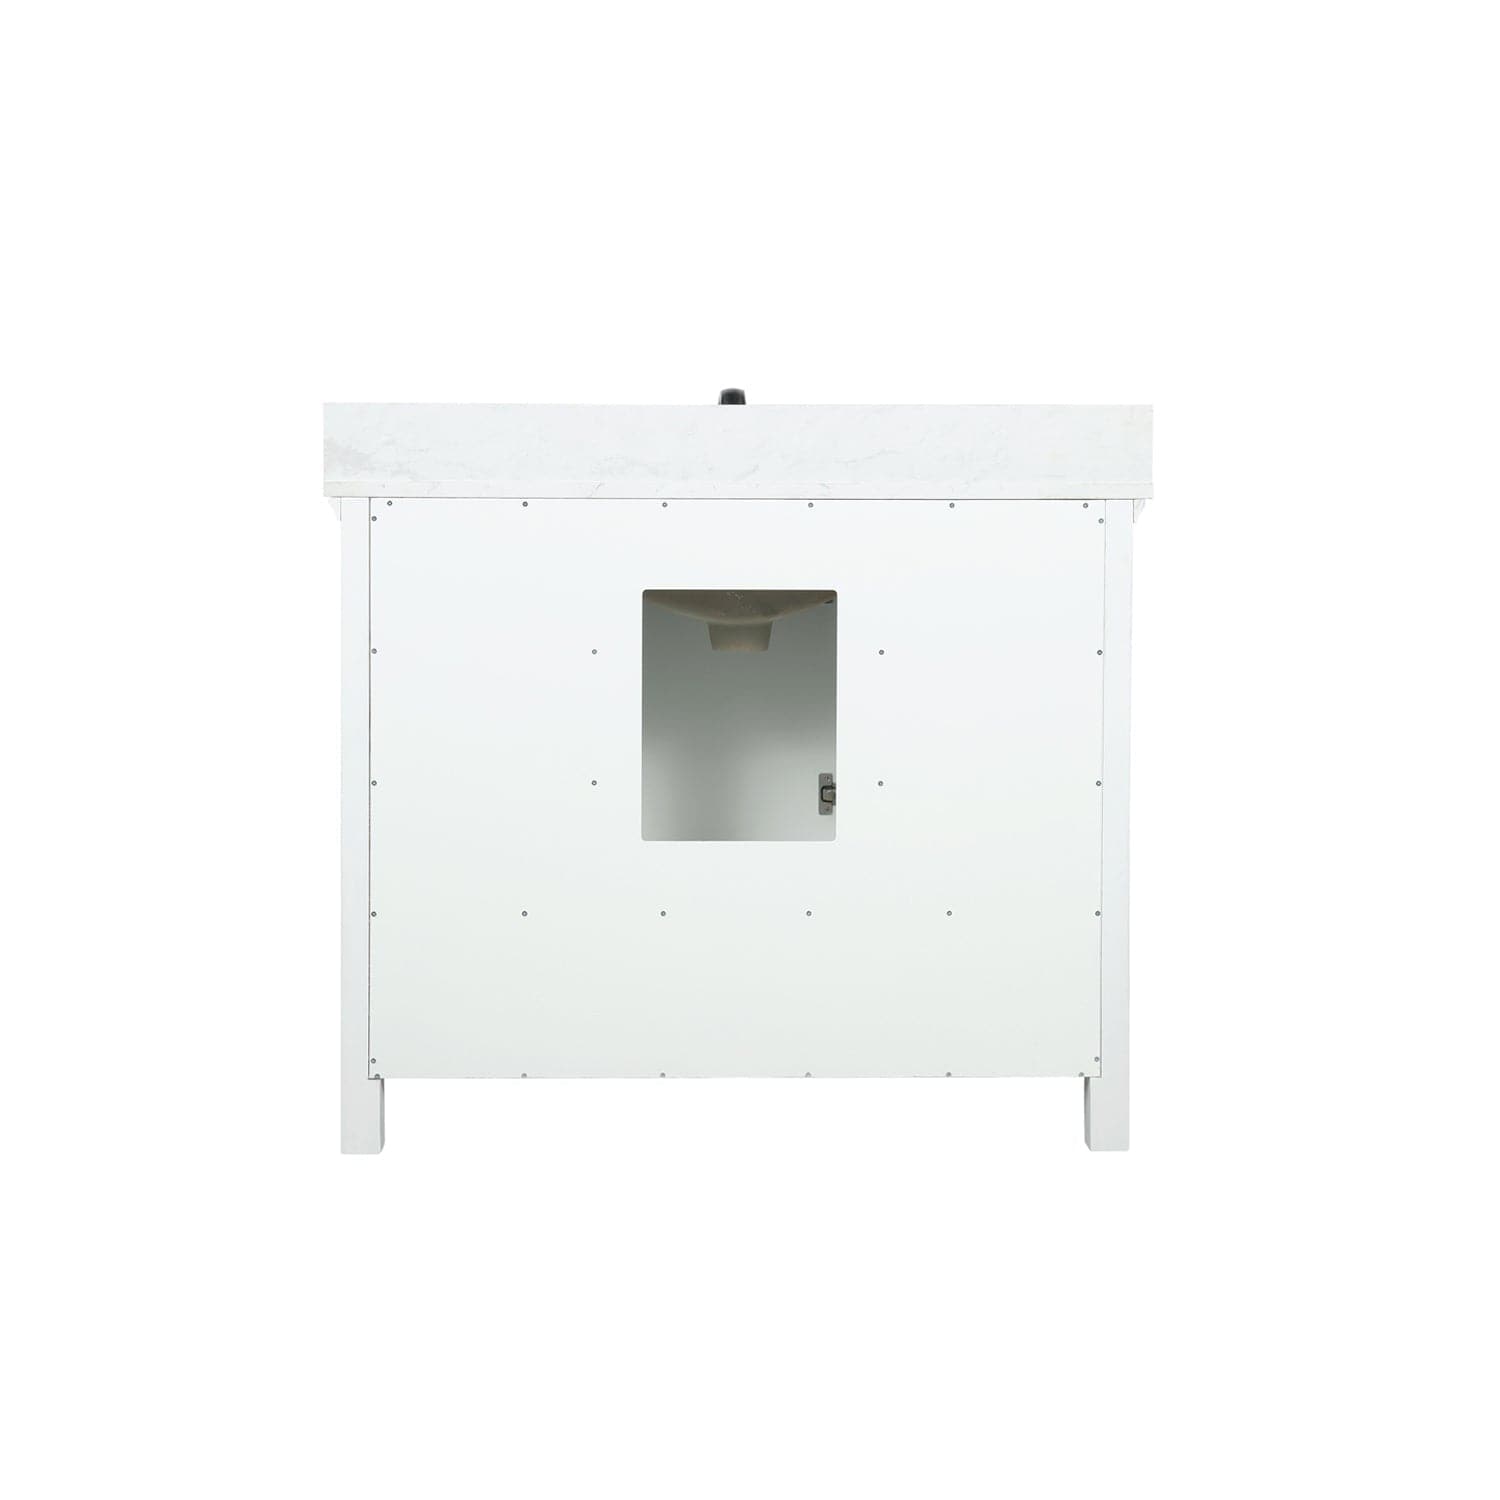 Altair Isla 42" Single Bathroom Vanity Set in White and Carrara White Marble Countertop without Mirror 538042-WH-AW-NM - Molaix696952511345Vanity538042-WH-AW-NM